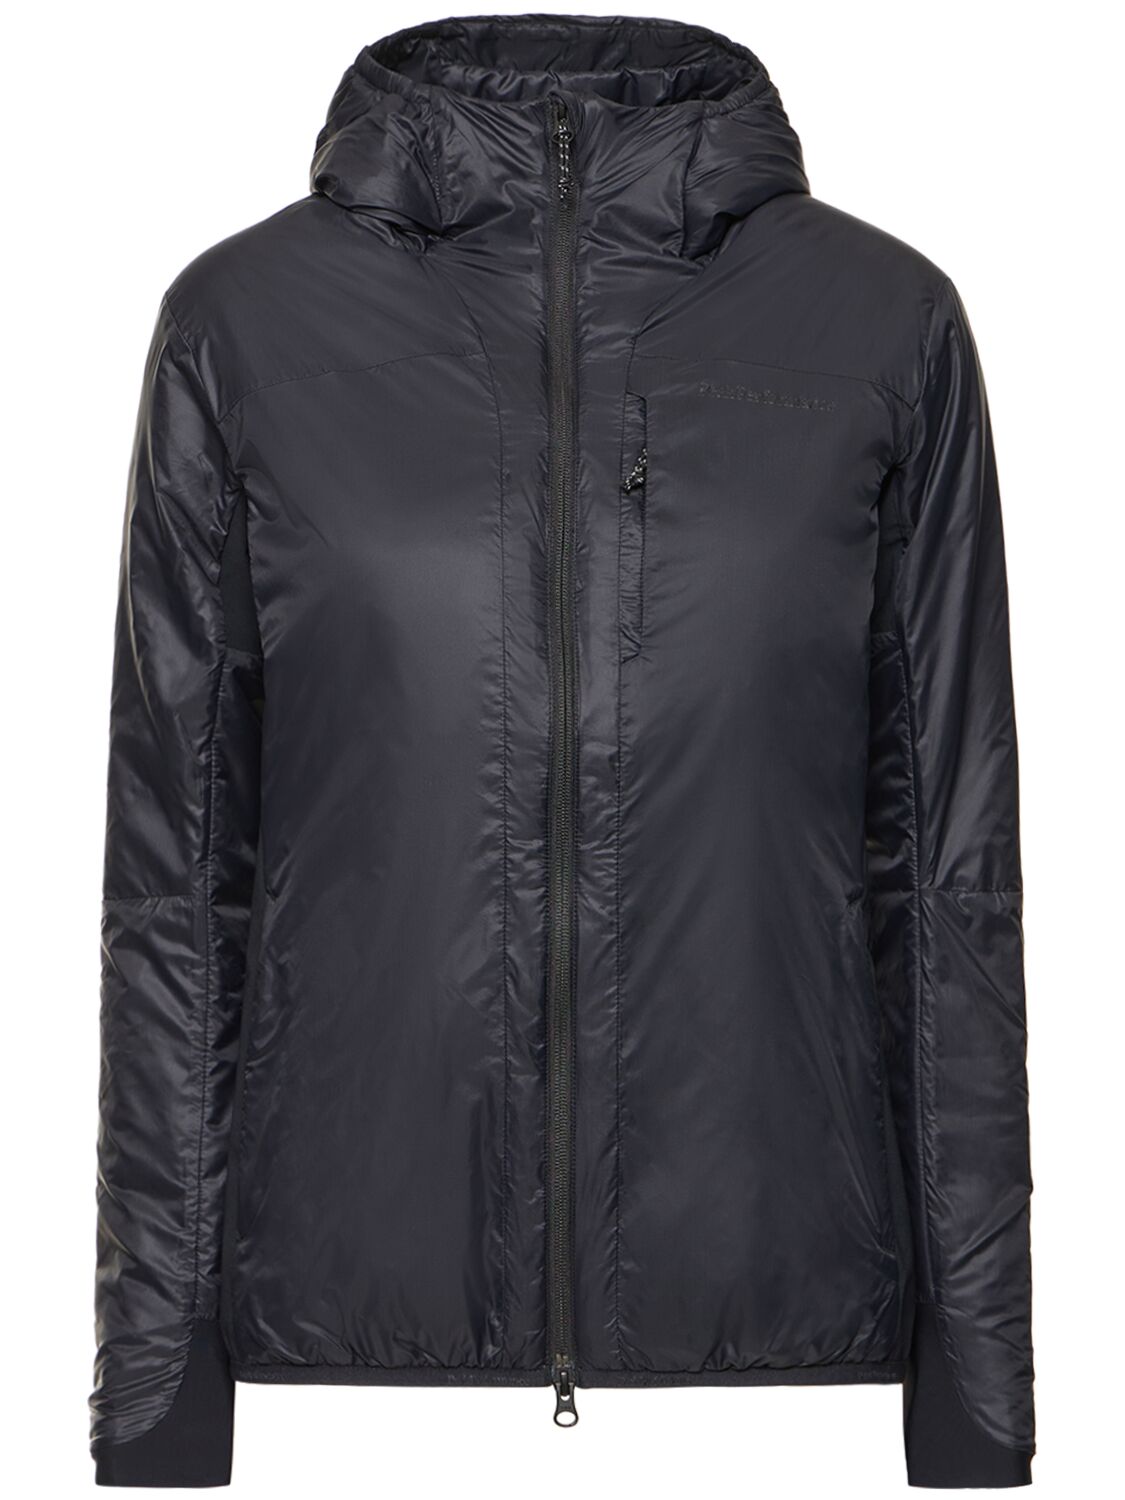 Peak Performance Radiance Recycled Tech Jacket In Black